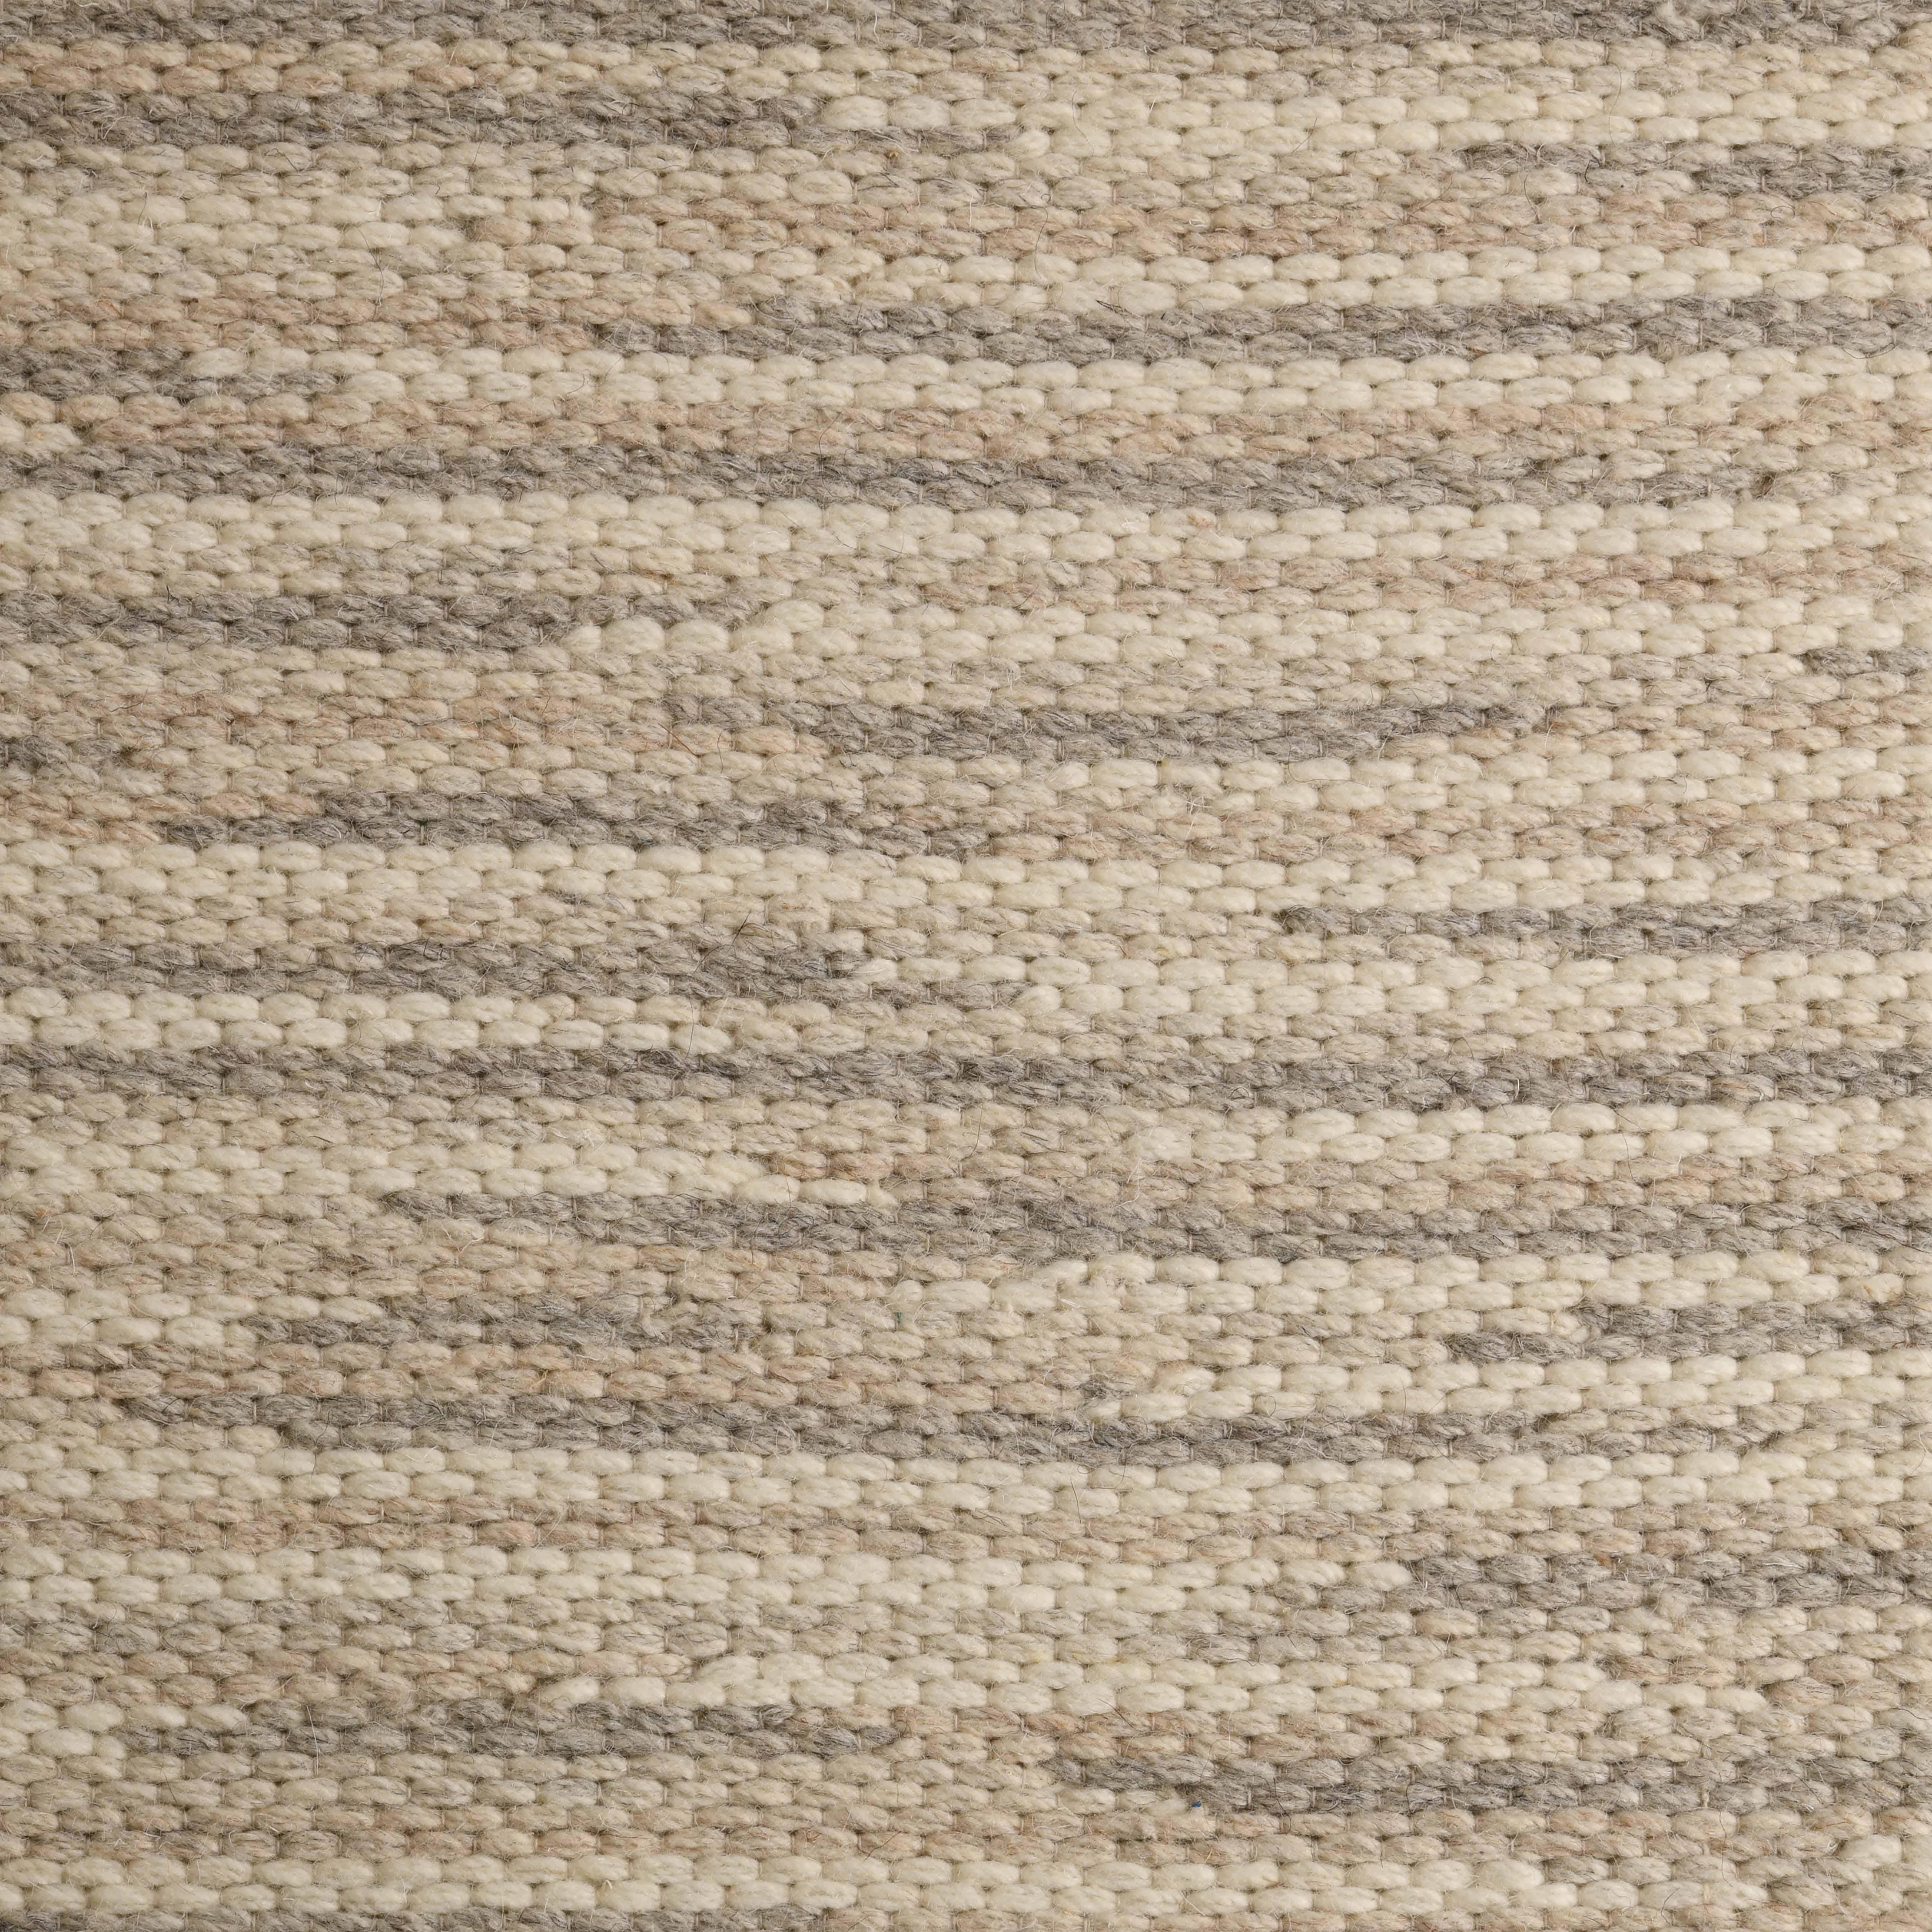 Contemporary Rivus, Stone, Handwoven Face 60% Undyed NZ Wool, 40% Undyed MED Wool, 6' x 9' For Sale